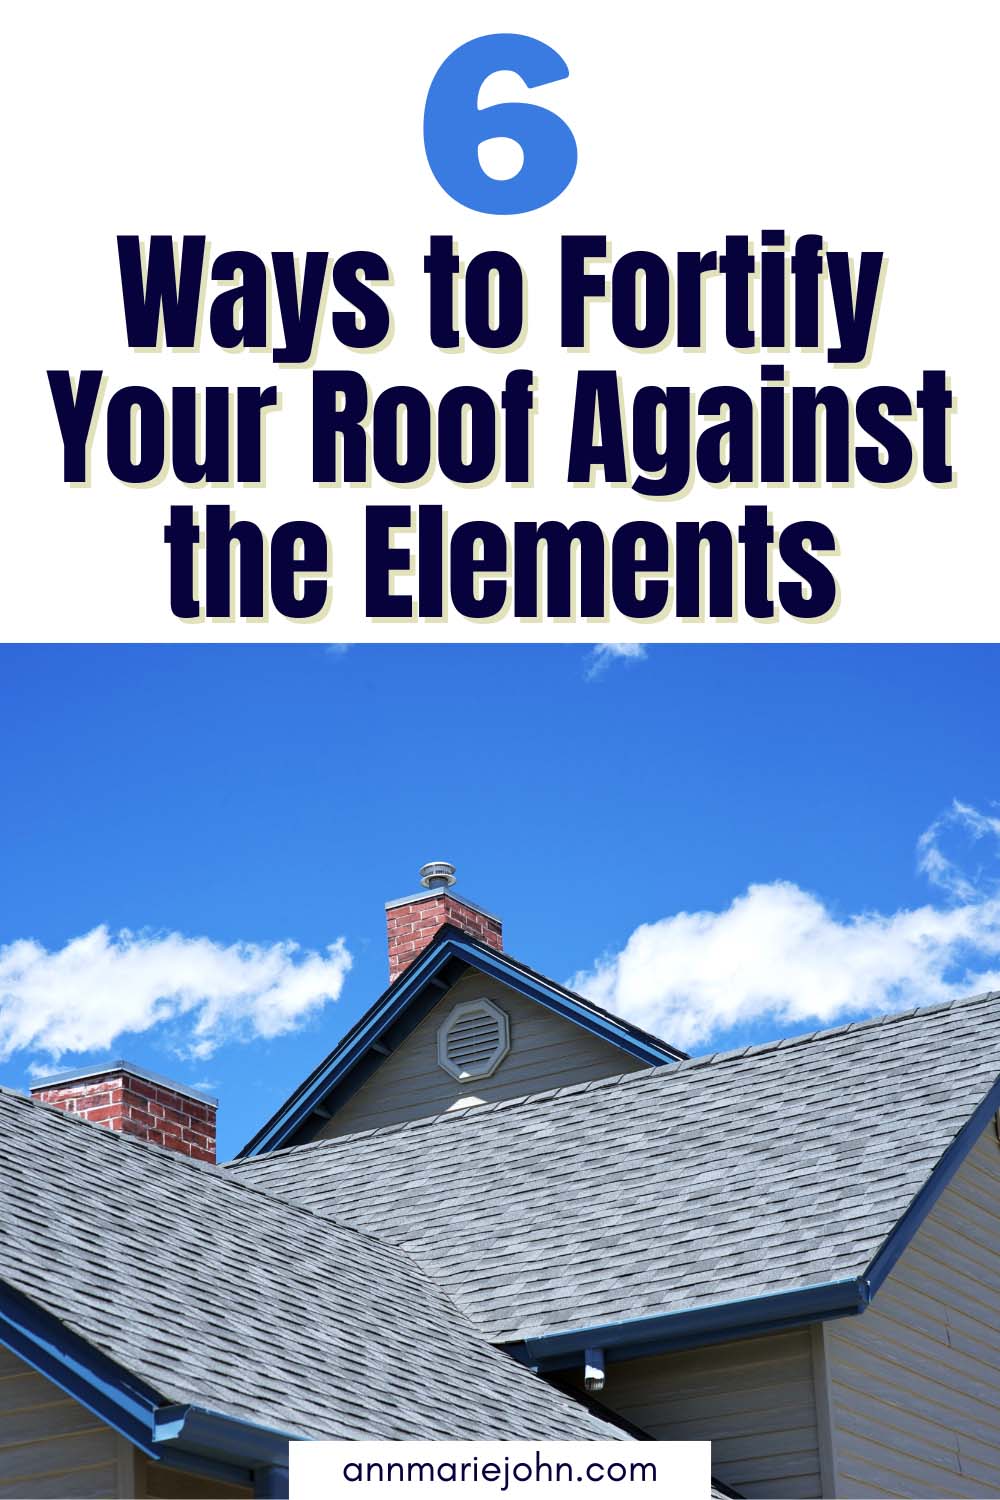 Ways to Fortify Your Roof Against the Elements